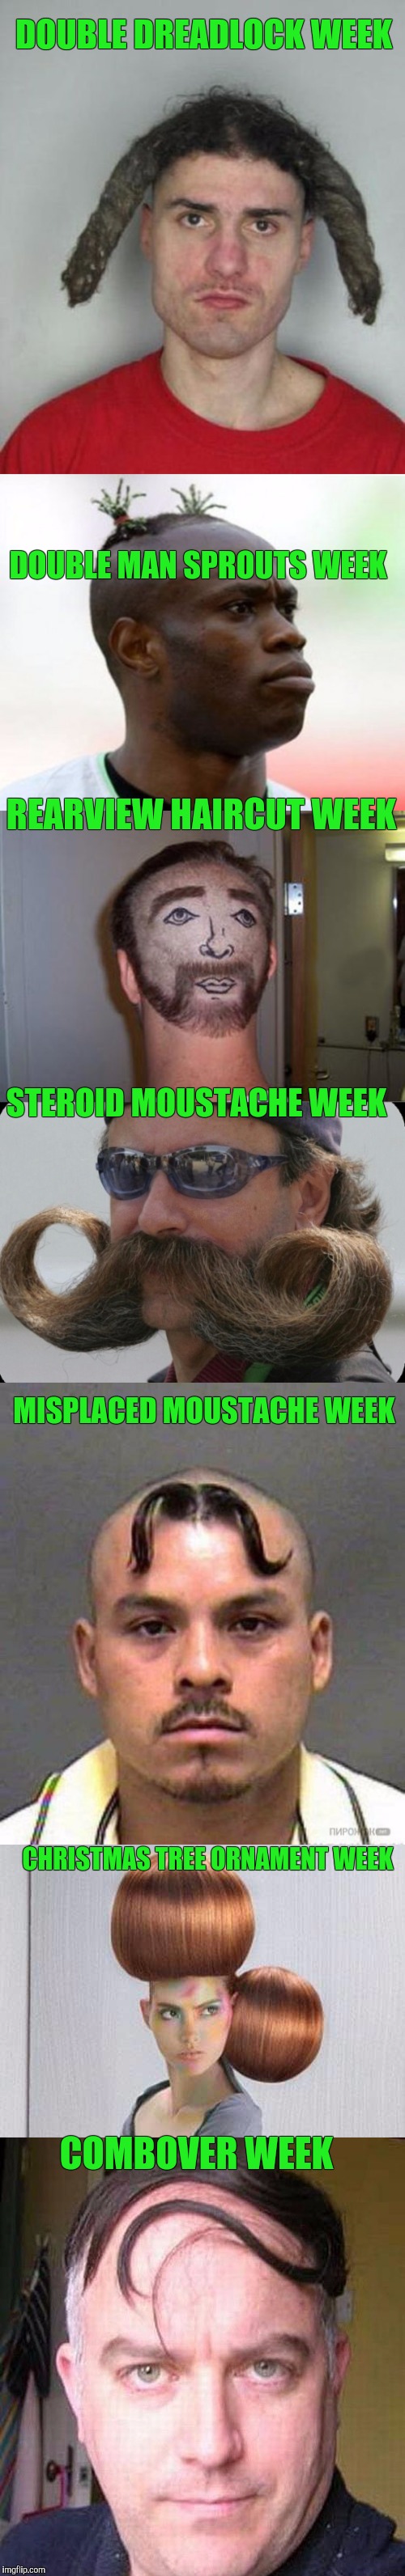 Here is a suggested list for the next 7 sponsored weeks on imgflip.  Feel free to add or subtract anything. | DOUBLE DREADLOCK WEEK; DOUBLE MAN SPROUTS WEEK; REARVIEW HAIRCUT WEEK; STEROID MOUSTACHE WEEK; MISPLACED MOUSTACHE WEEK; CHRISTMAS TREE ORNAMENT WEEK; COMBOVER WEEK | image tagged in funny haircut,combover creeper,moustache,imgflip,memes,white guy dreadlocks | made w/ Imgflip meme maker